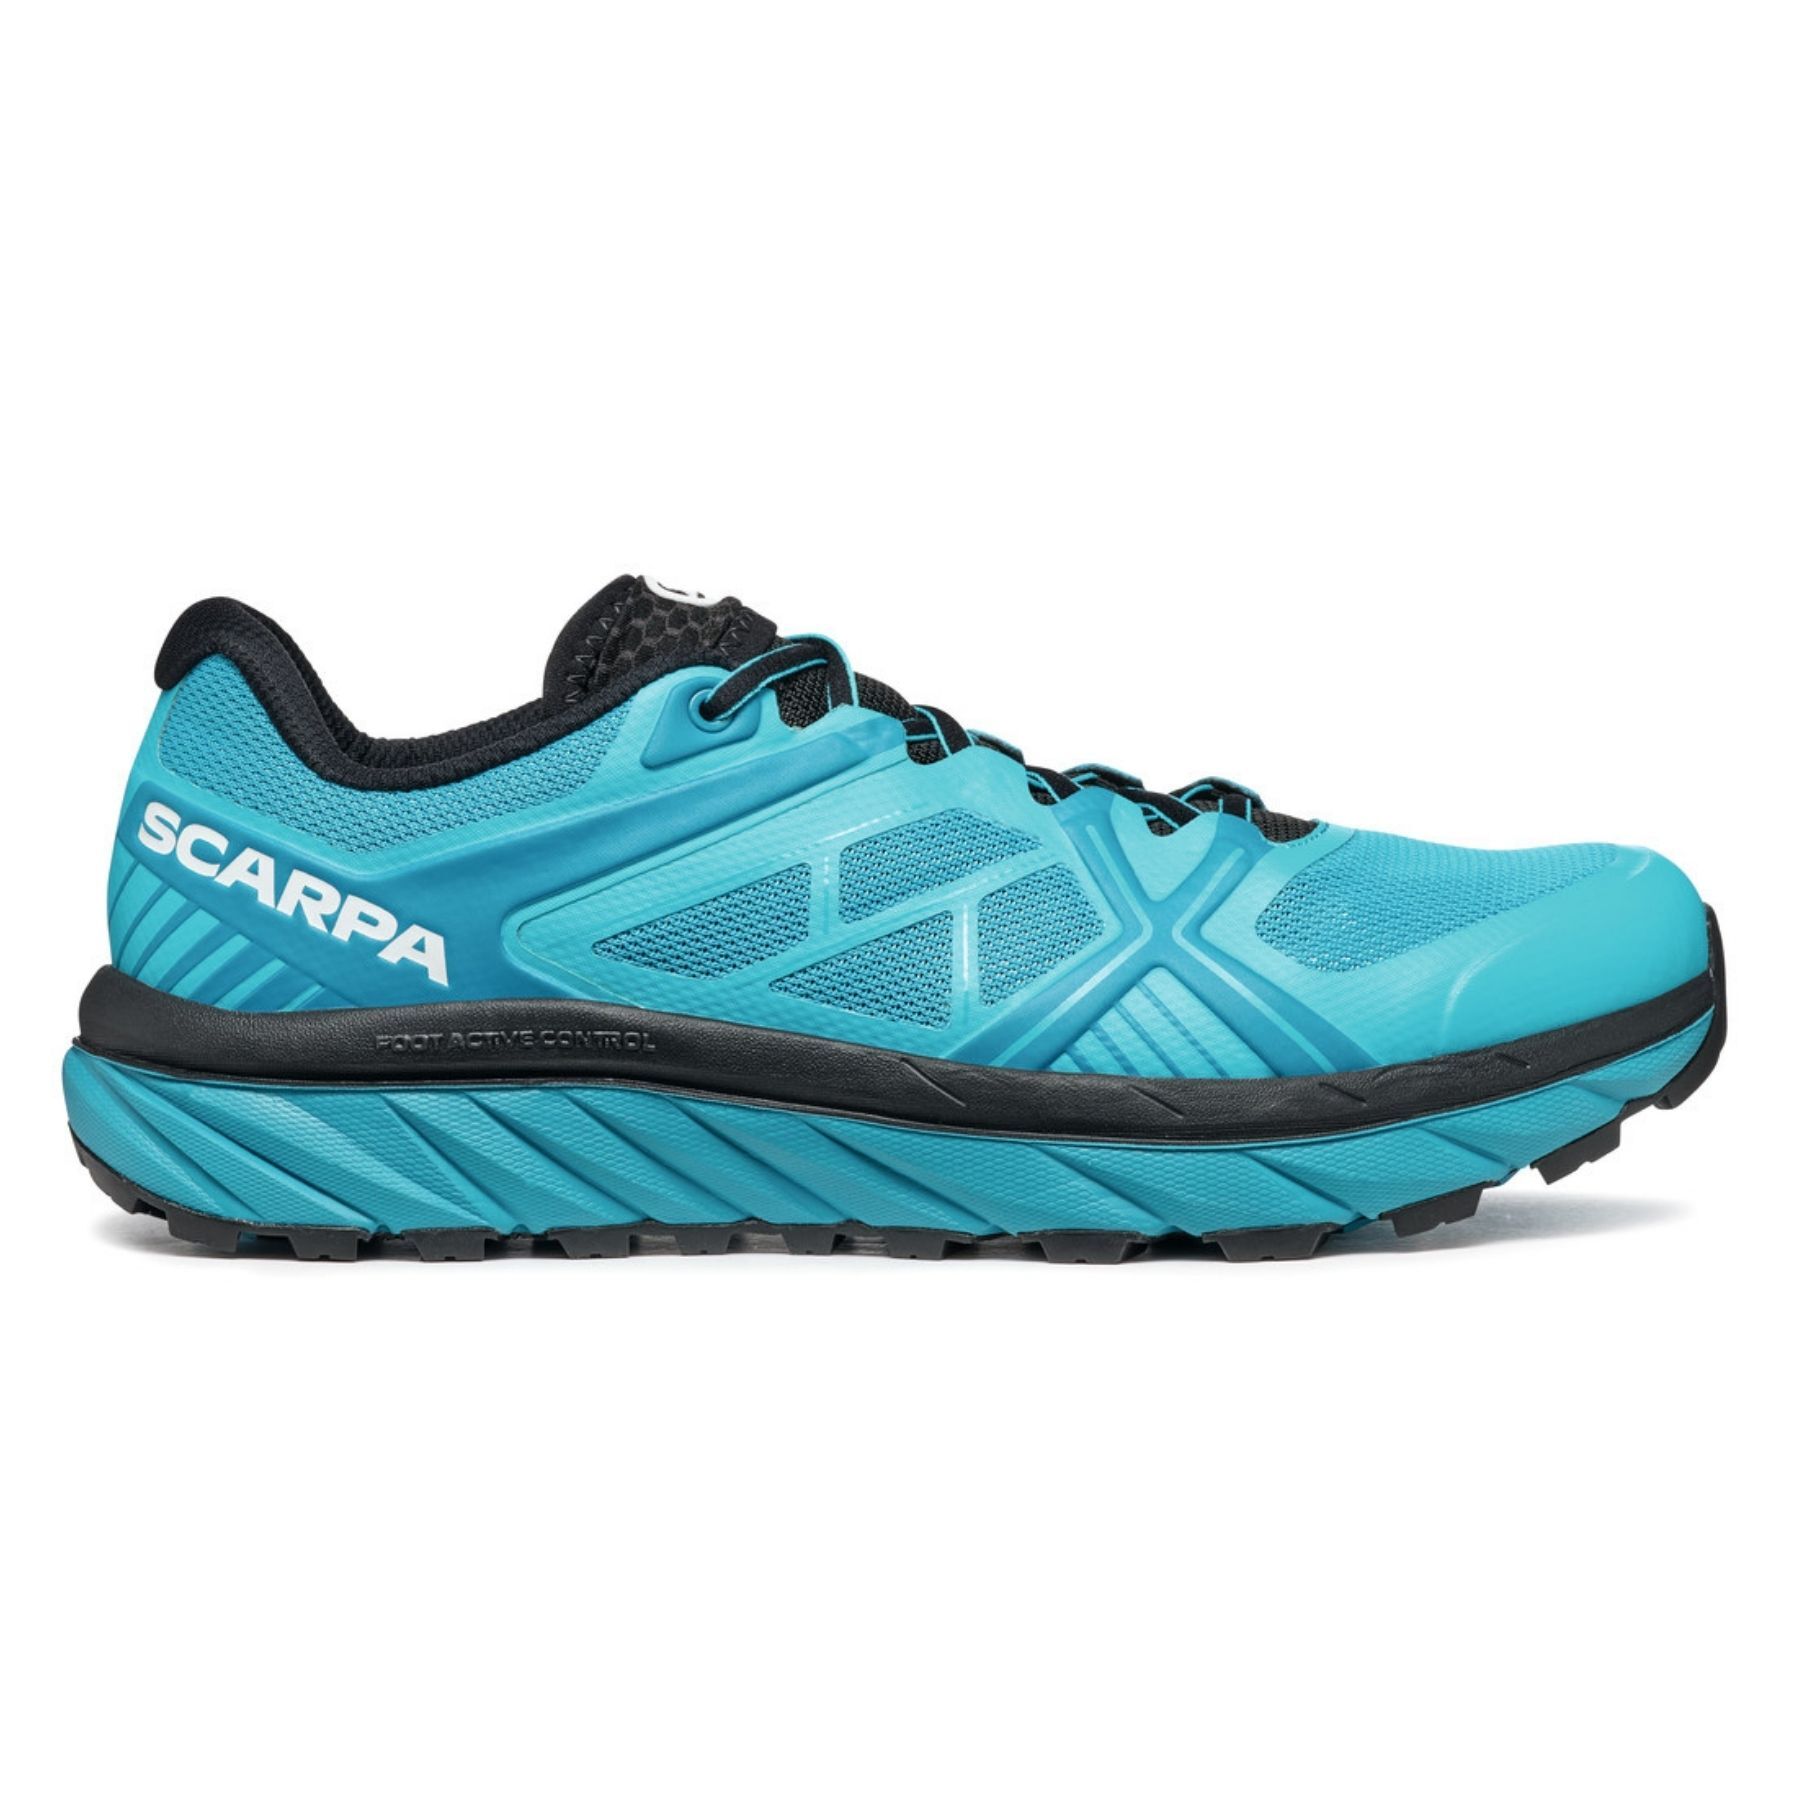 Scarpa Spin Infinity - Trail running shoes - Men's